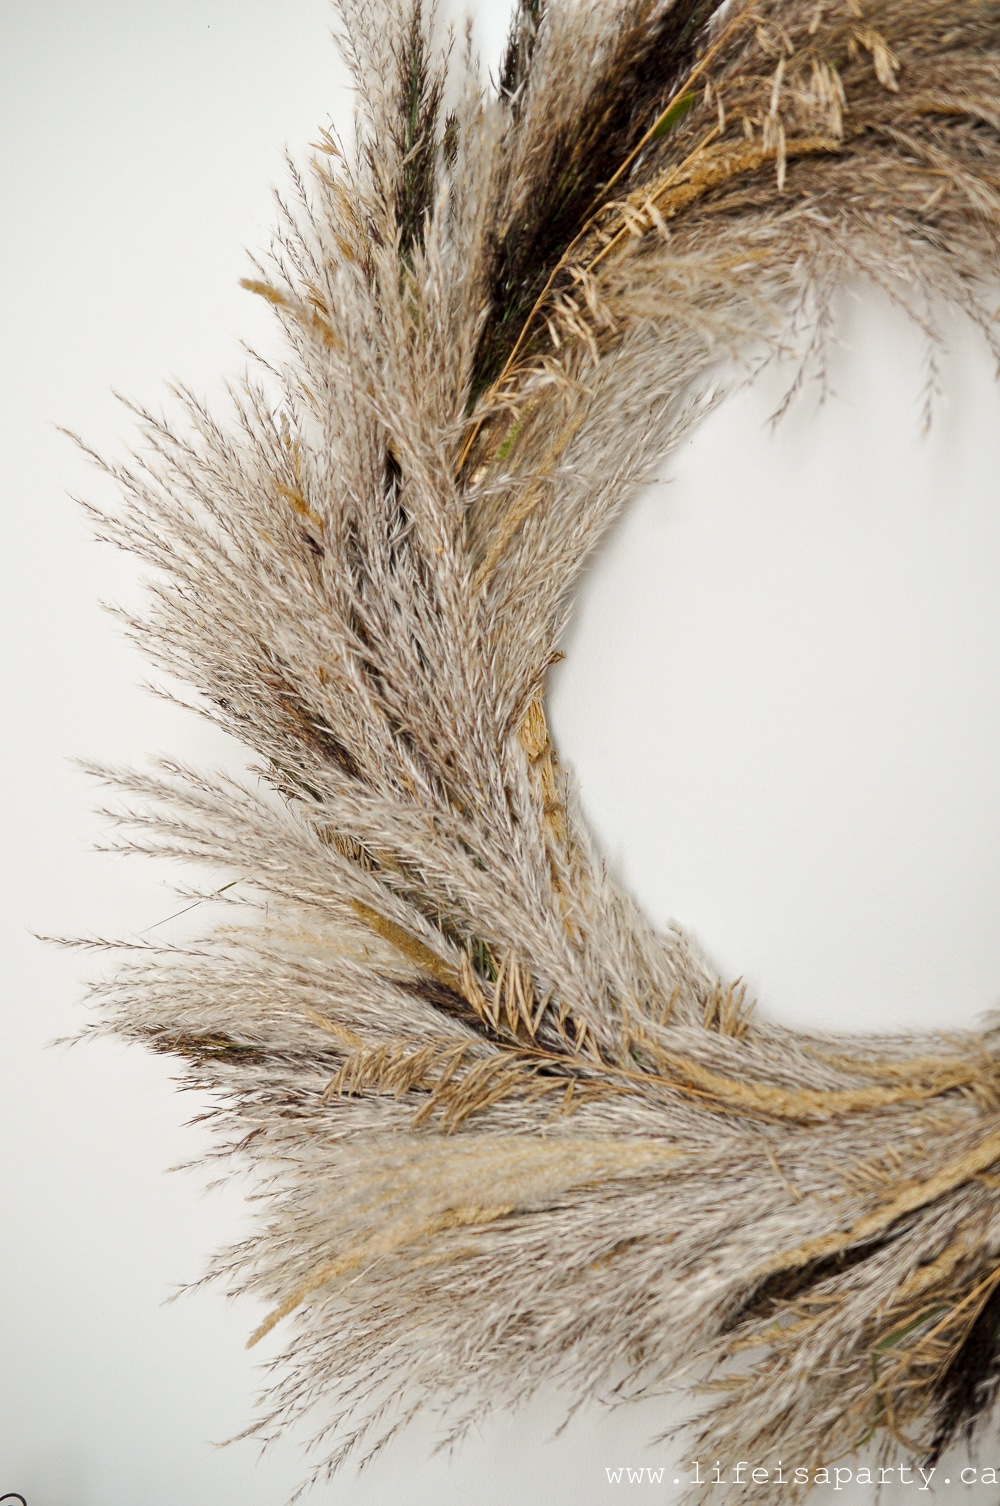 Pampas Grass Wreath: This inexpensive DIY wreath is made from foraged grasses. Perfect for fall, easy to make and full of texture.